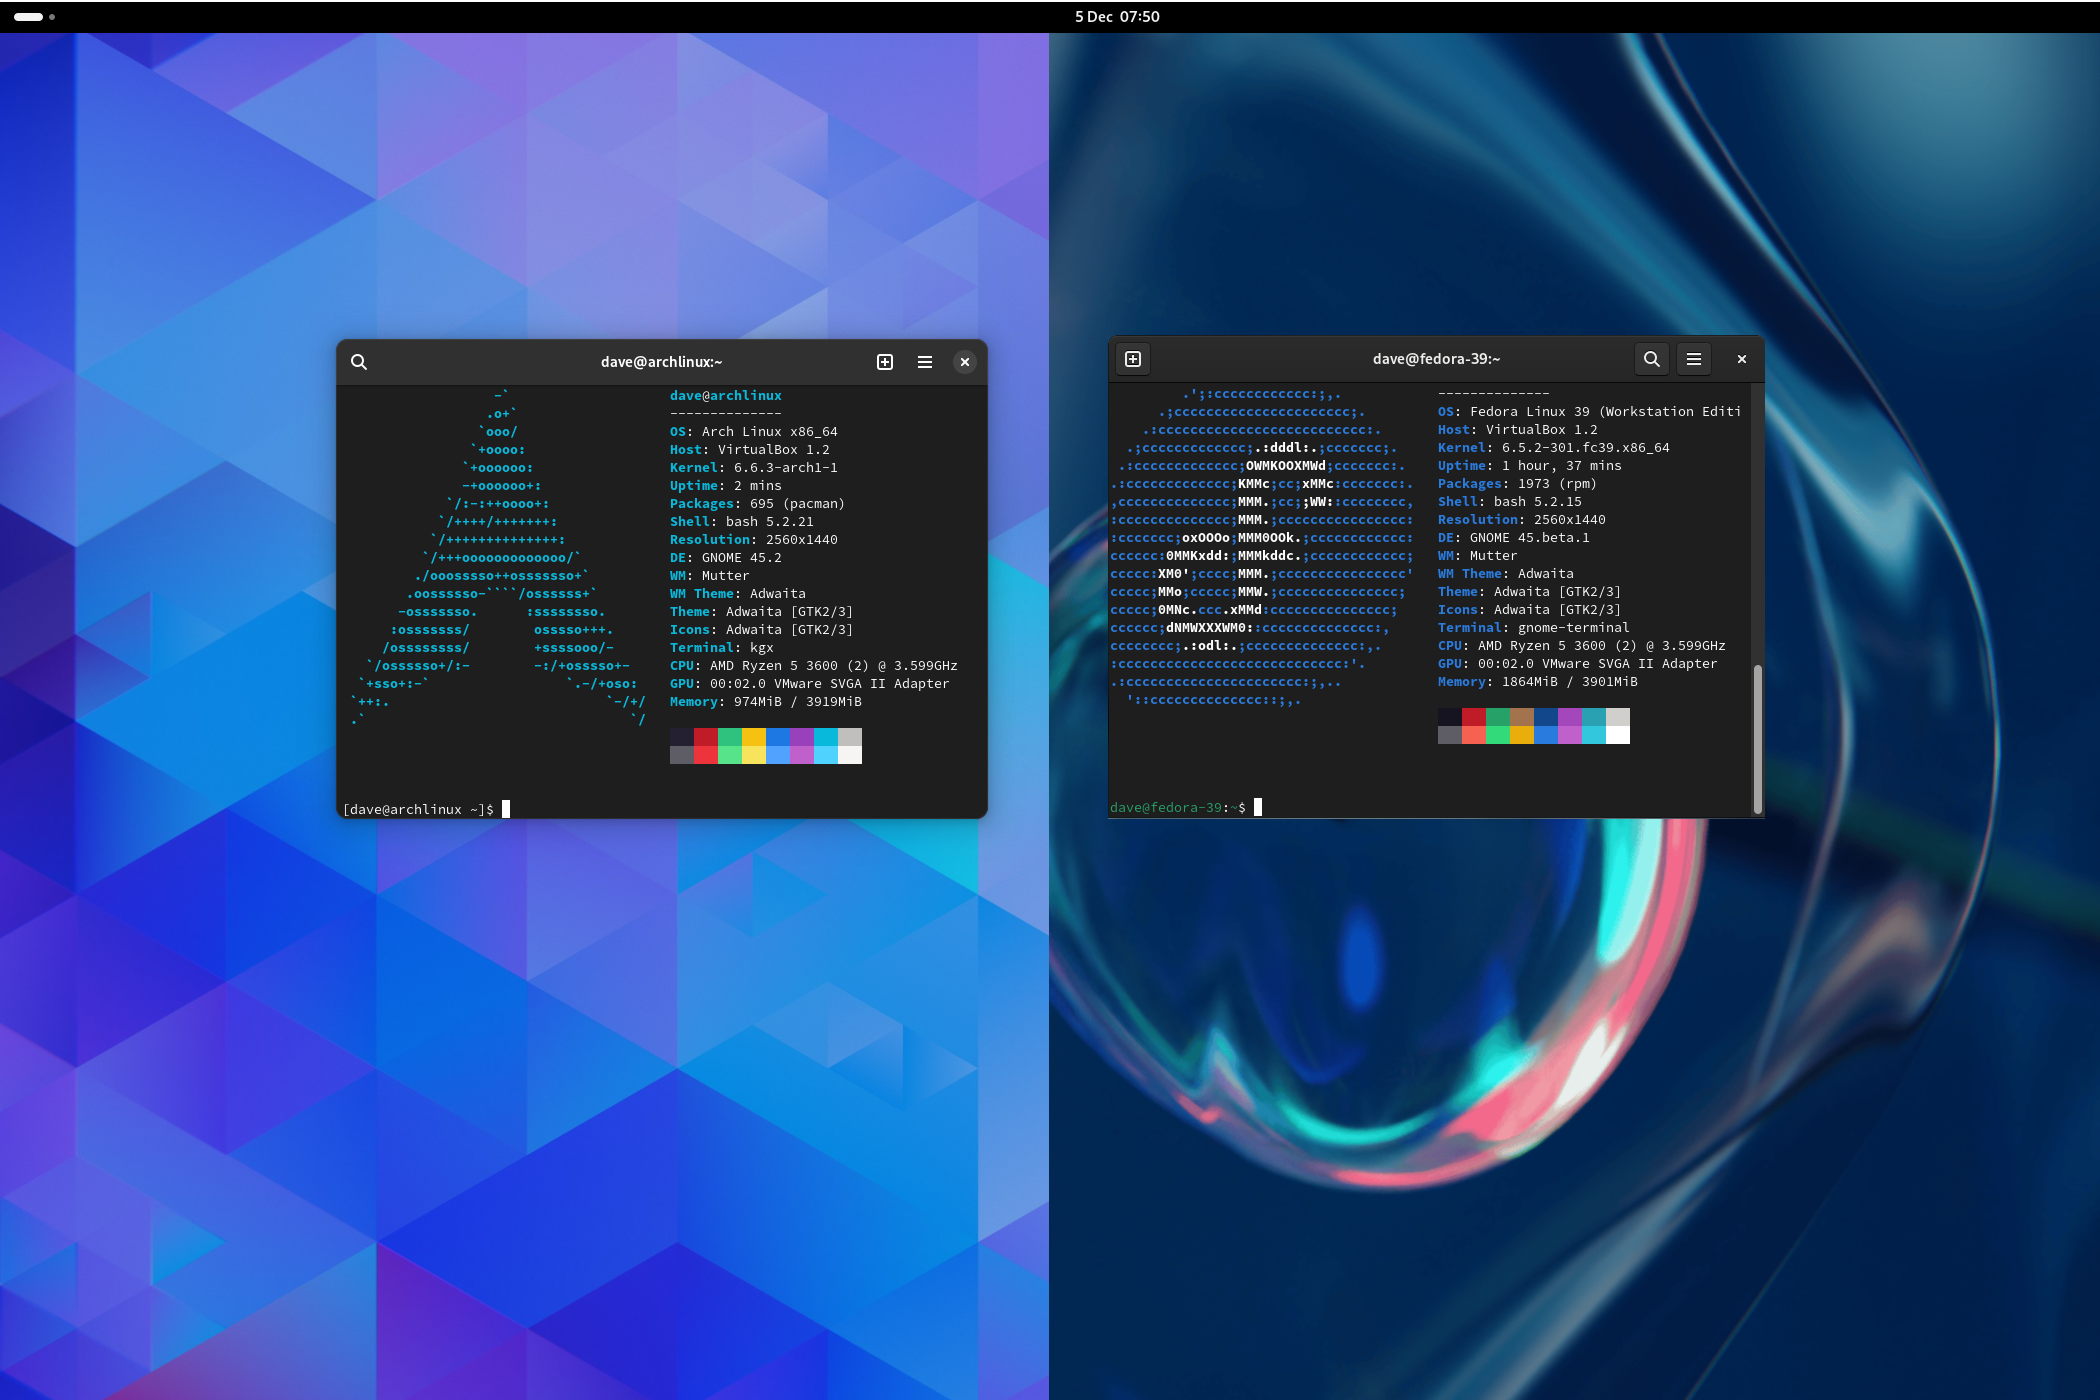 Arch Linux and Fedora Linux desktops each with a terminal window open running Neofetch